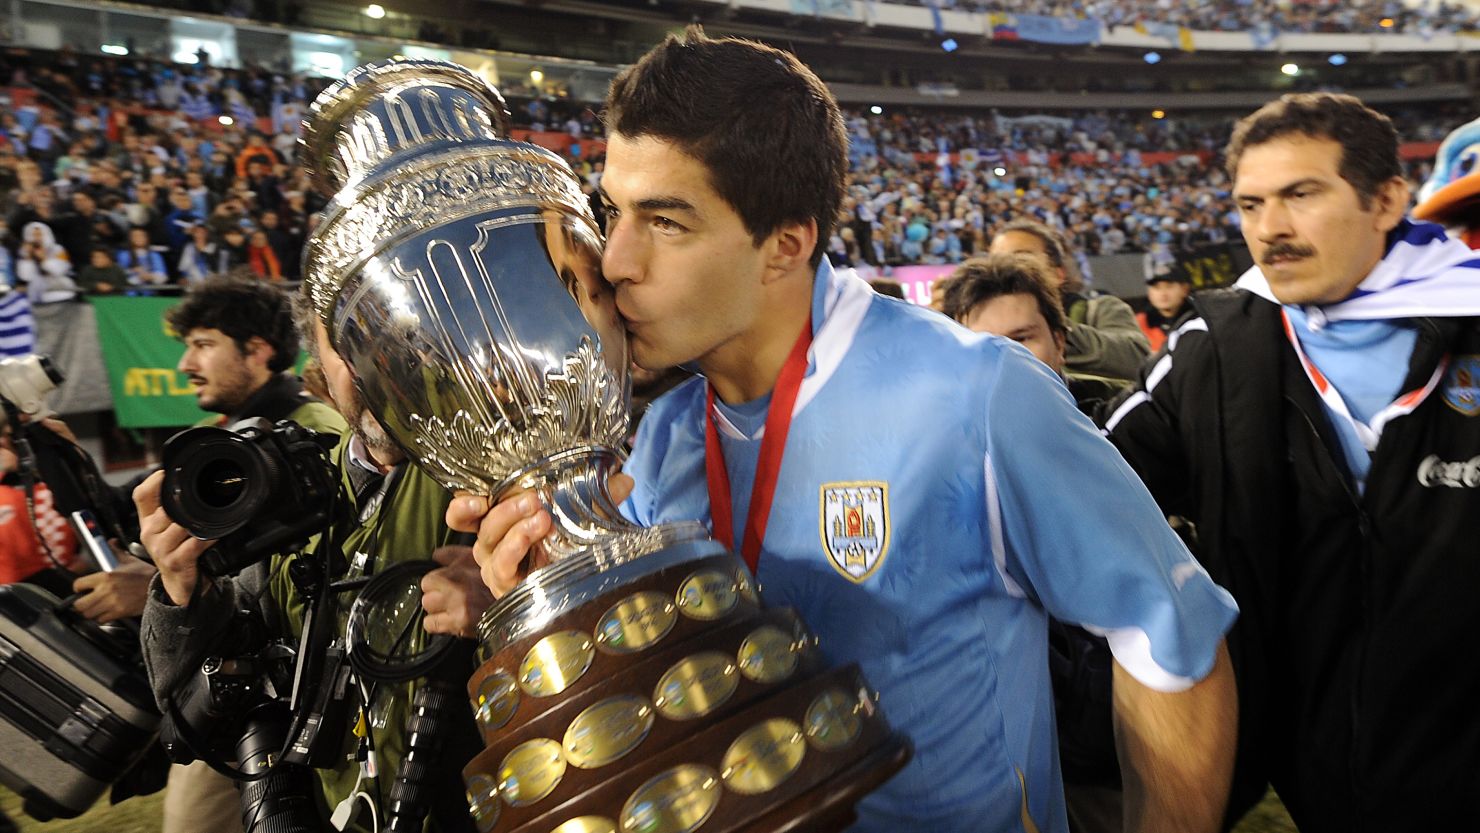 Luis Suarez's Uruguay won the 2011 Copa America, but will he be playing in the U.S. in 2016?